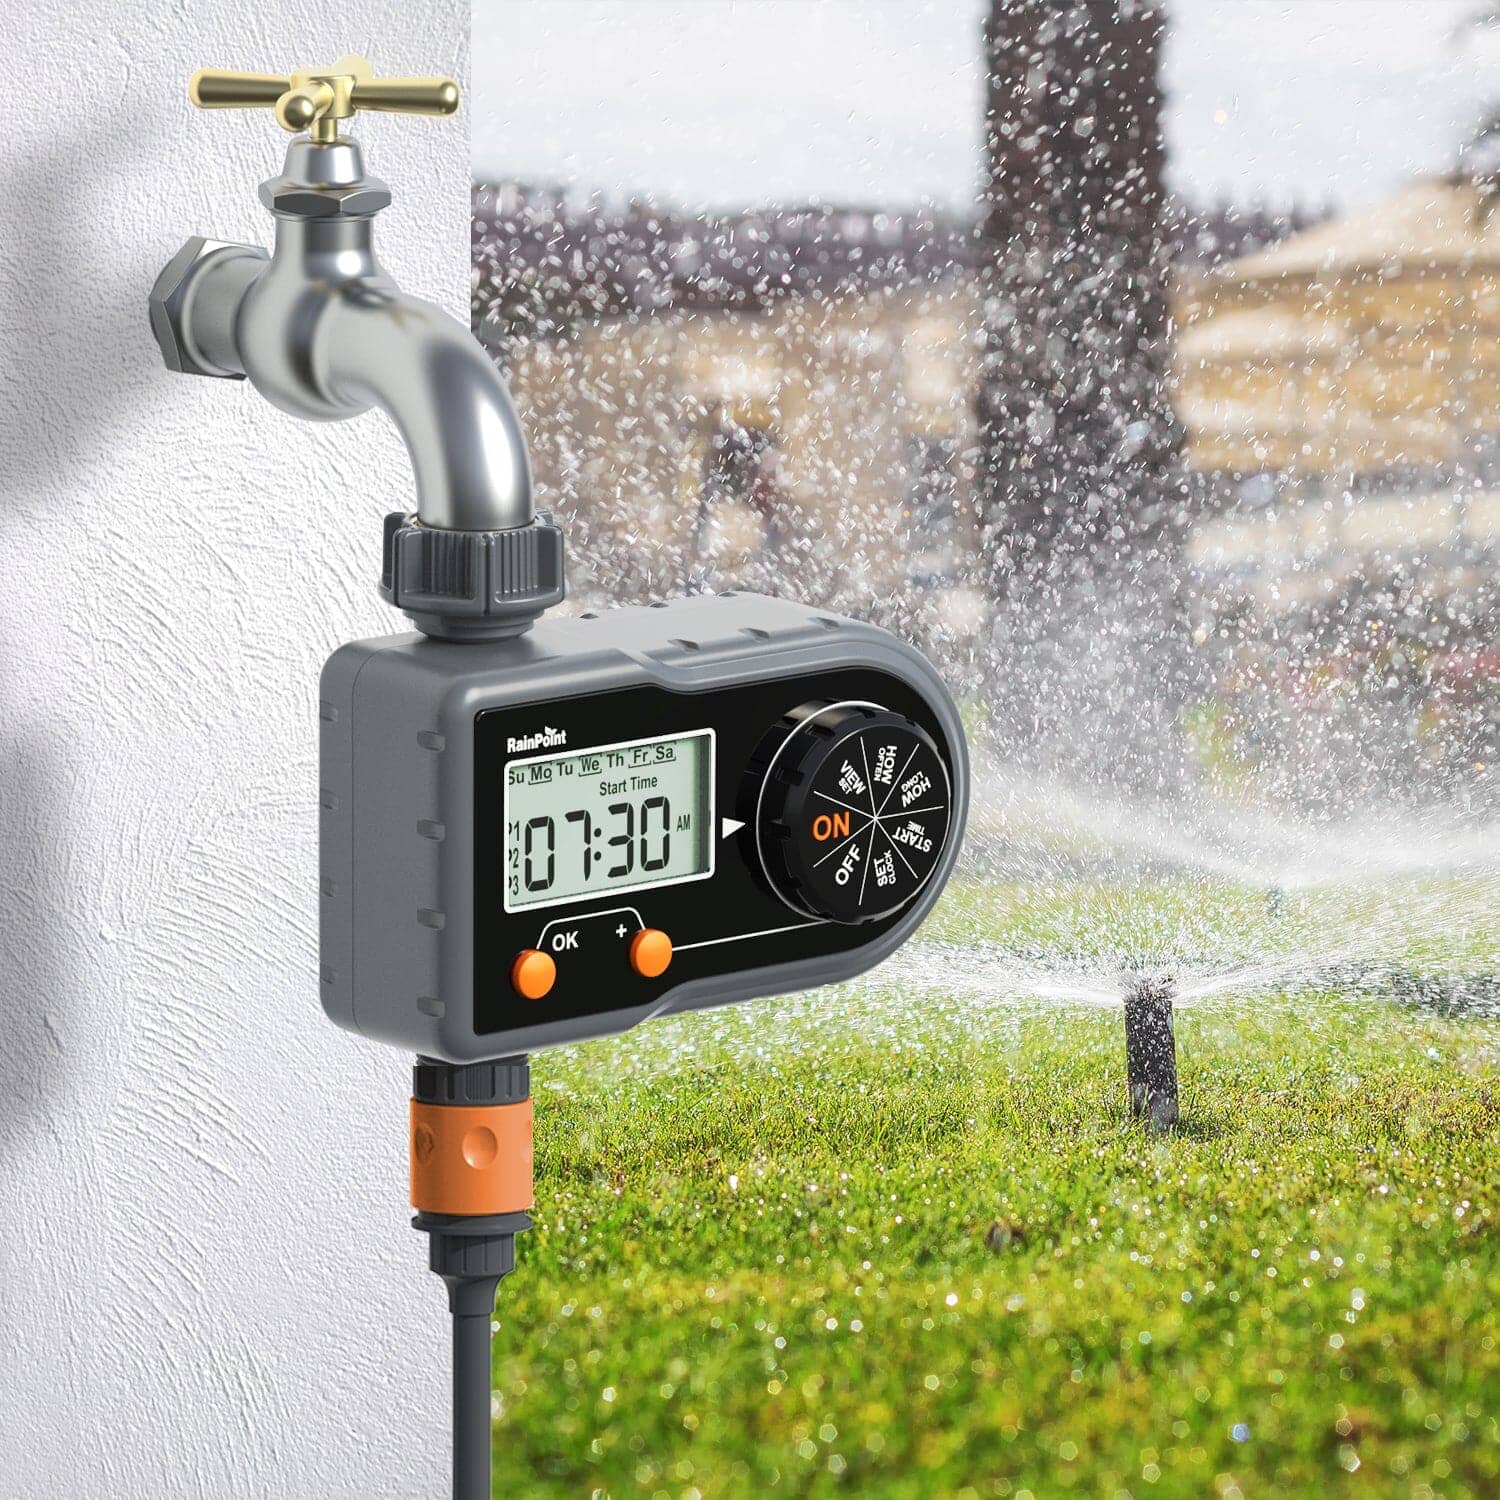 Hose Timer with 3 Individual Programs, Water Timer for Garden Hose Faucet